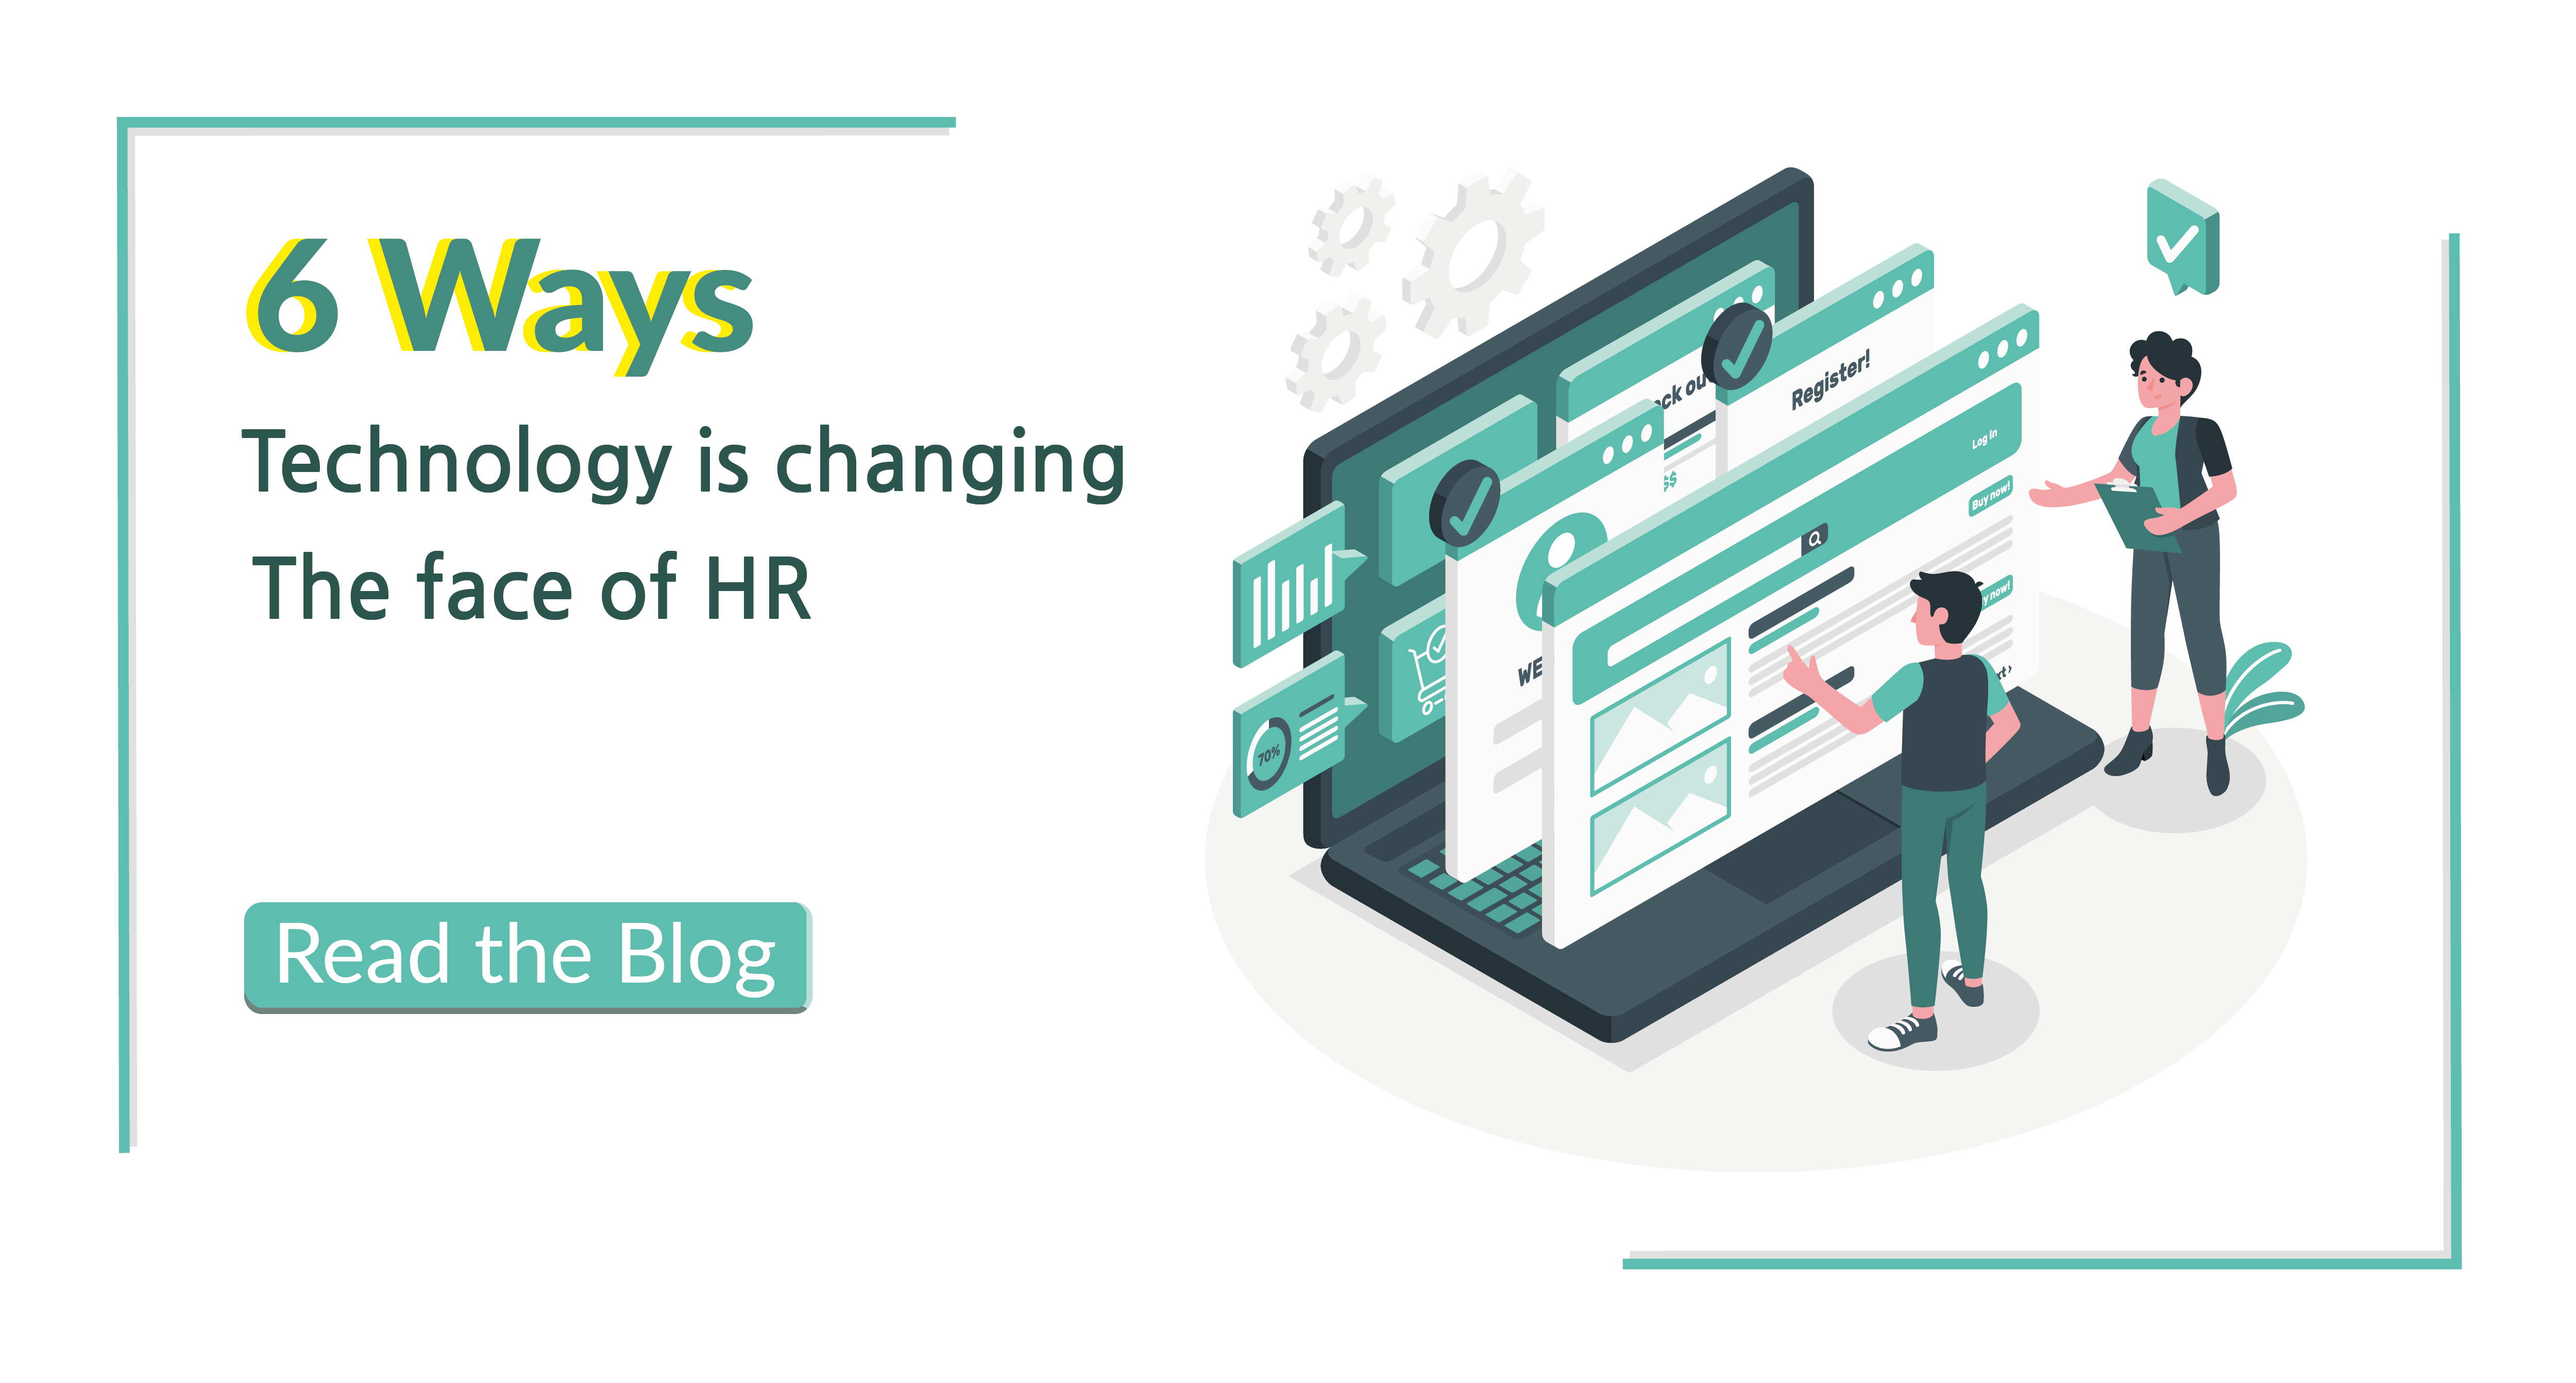 6 Ways Technology is Shifting the Face of HR